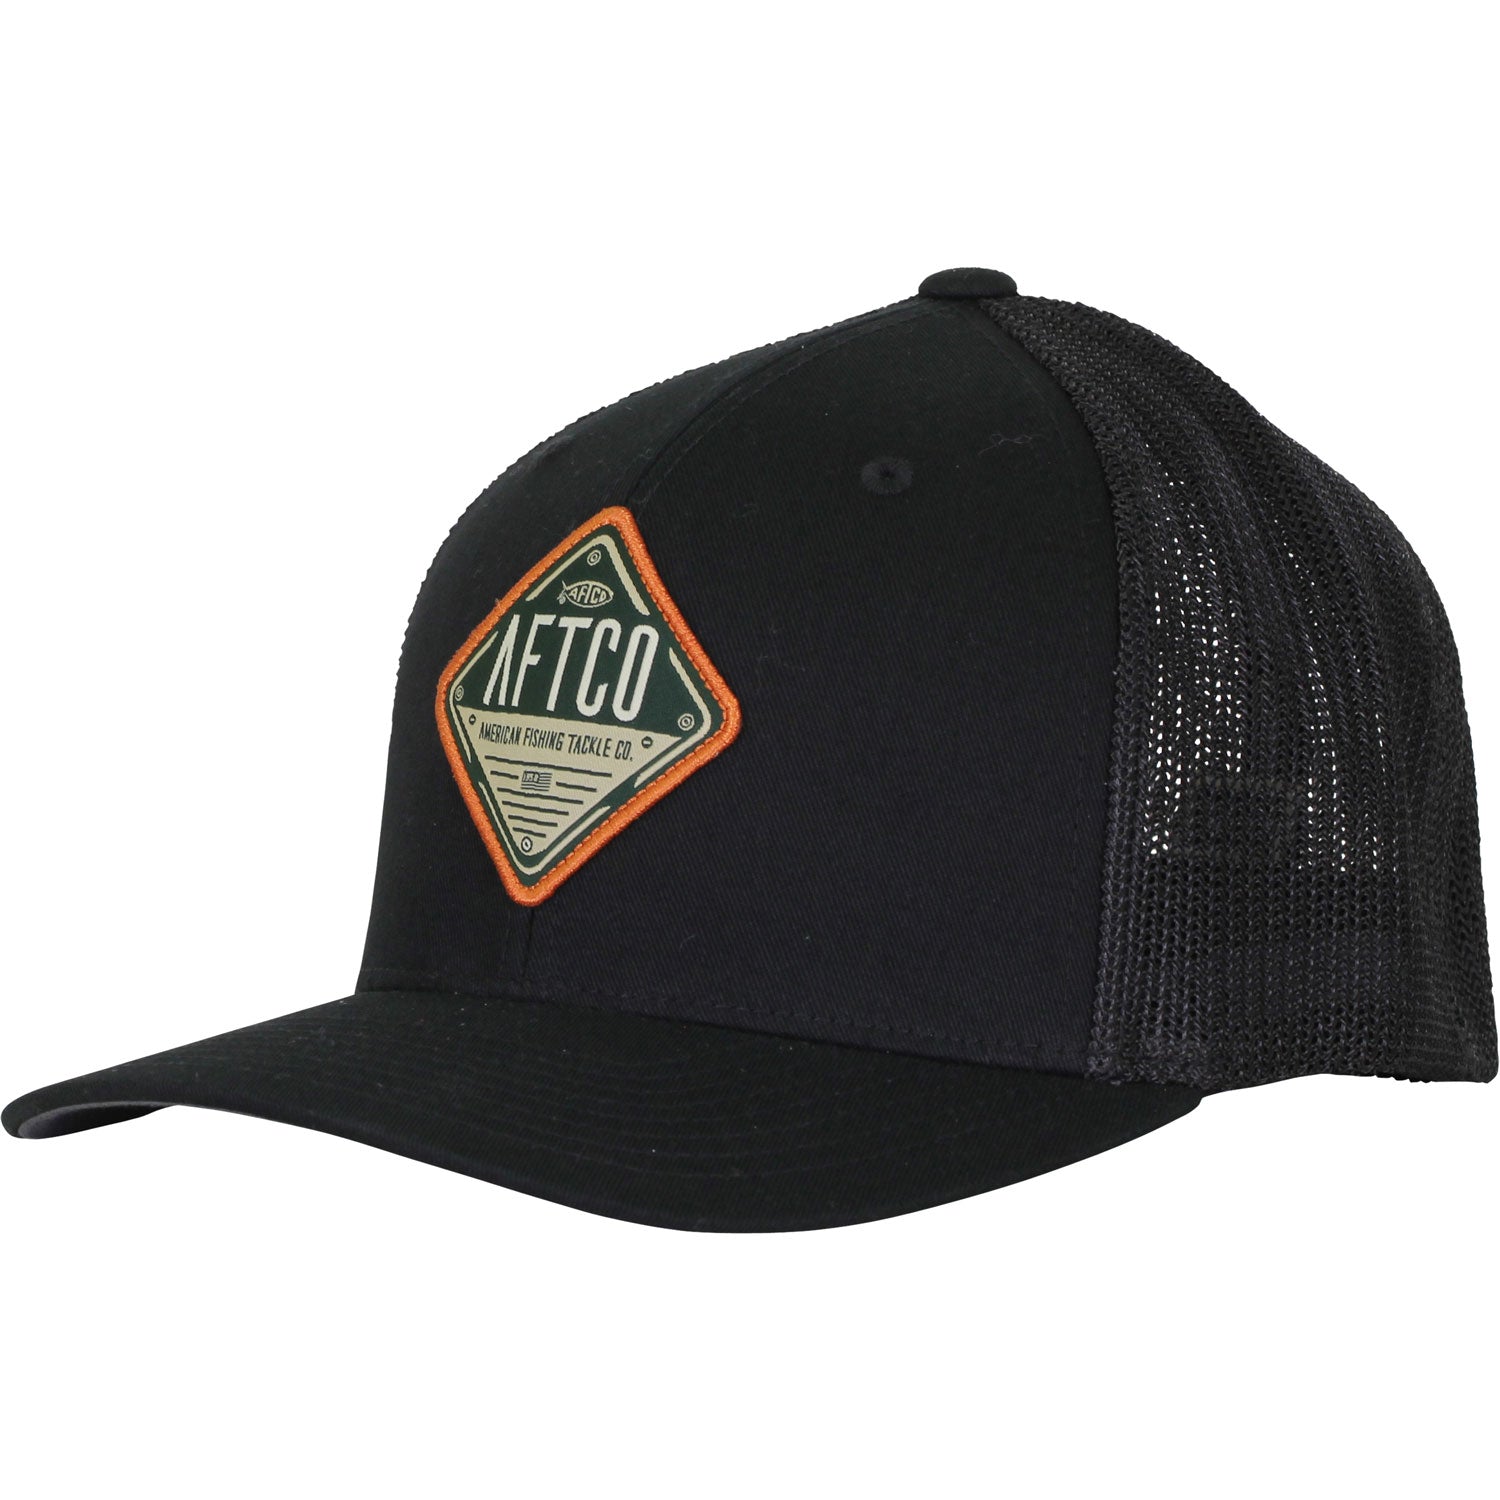 AFTCO Fishing Charters Hat